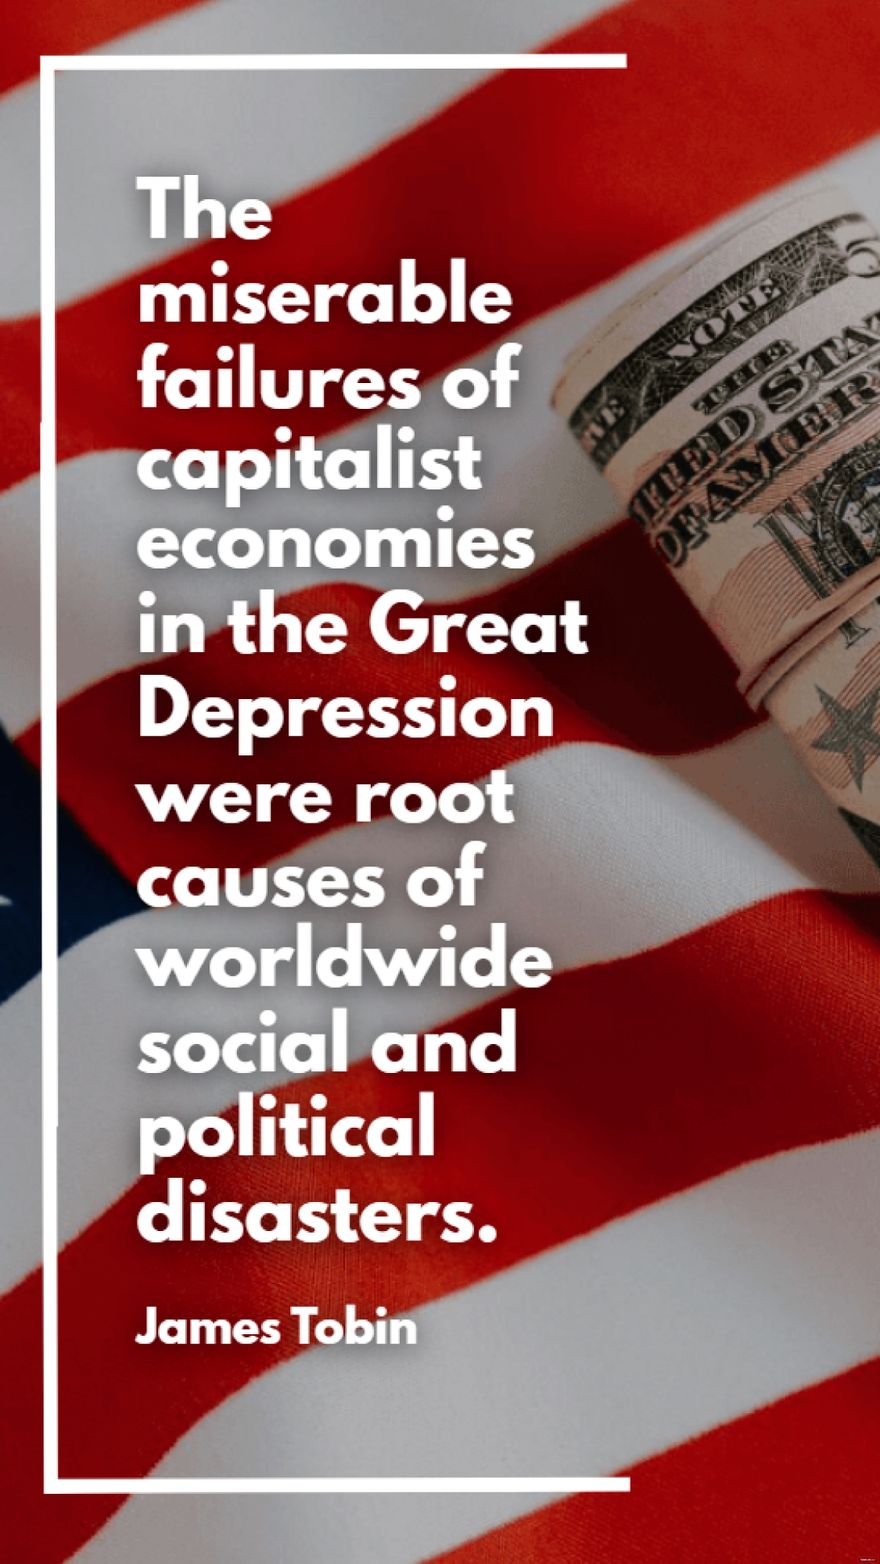 James Tobin - The miserable failures of capitalist economies in the Great Depression were root causes of worldwide social and political disasters.